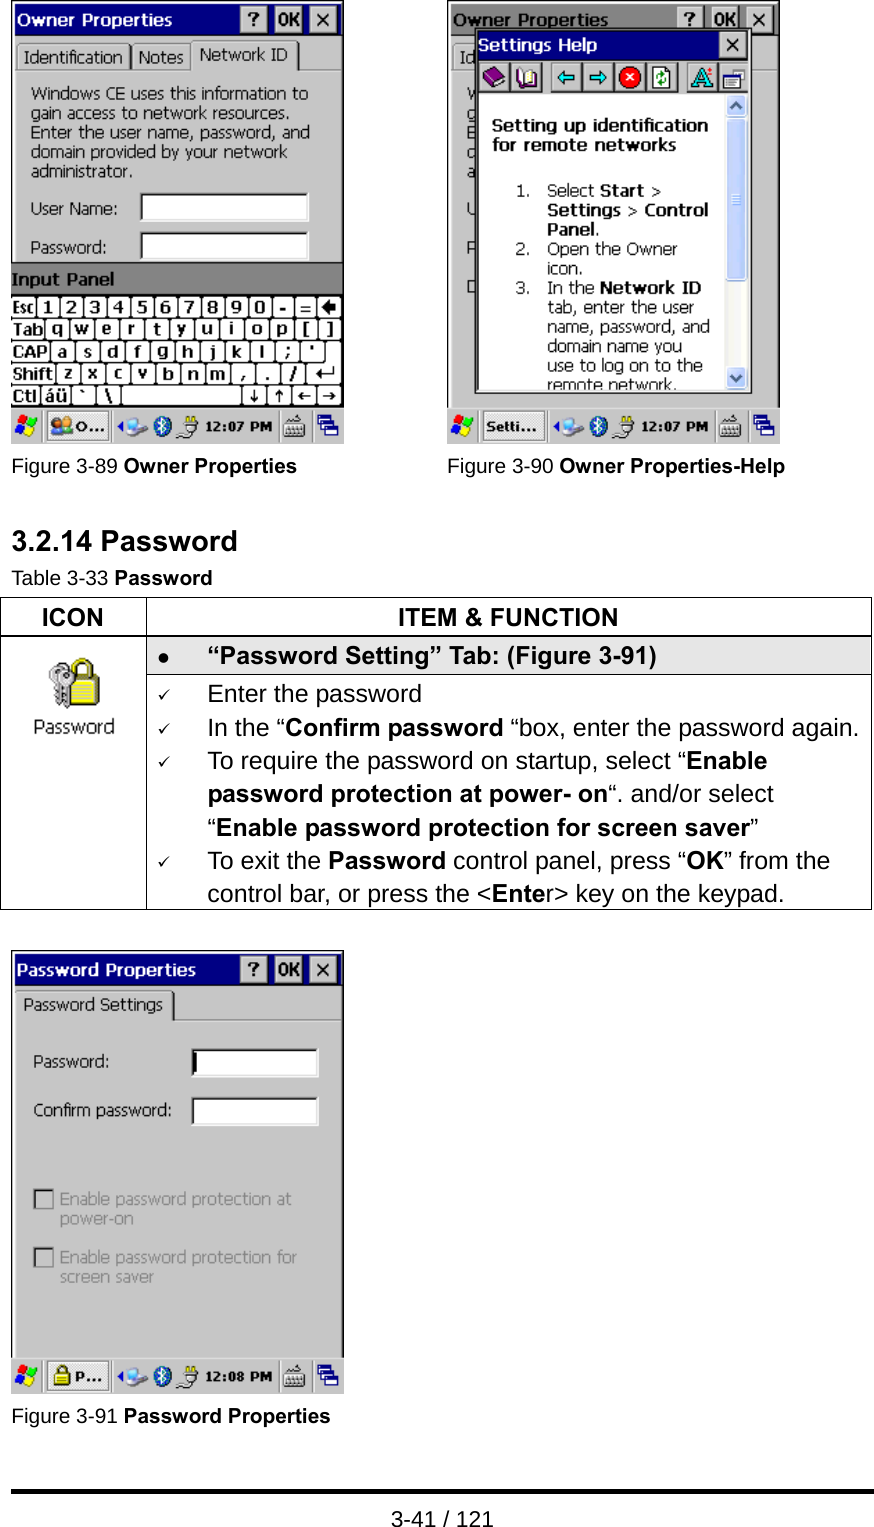  3-41 / 121    Figure 3-89 Owner Properties  Figure 3-90 Owner Properties-Help  3.2.14 Password Table 3-33 Password ICON  ITEM &amp; FUNCTION z “Password Setting” Tab: (Figure 3-91)  9 Enter the password 9 In the “Confirm password “box, enter the password again.9 To require the password on startup, select “Enable password protection at power- on“. and/or select “Enable password protection for screen saver” 9 To exit the Password control panel, press “OK” from the control bar, or press the &lt;Enter&gt; key on the keypad.    Figure 3-91 Password Properties   